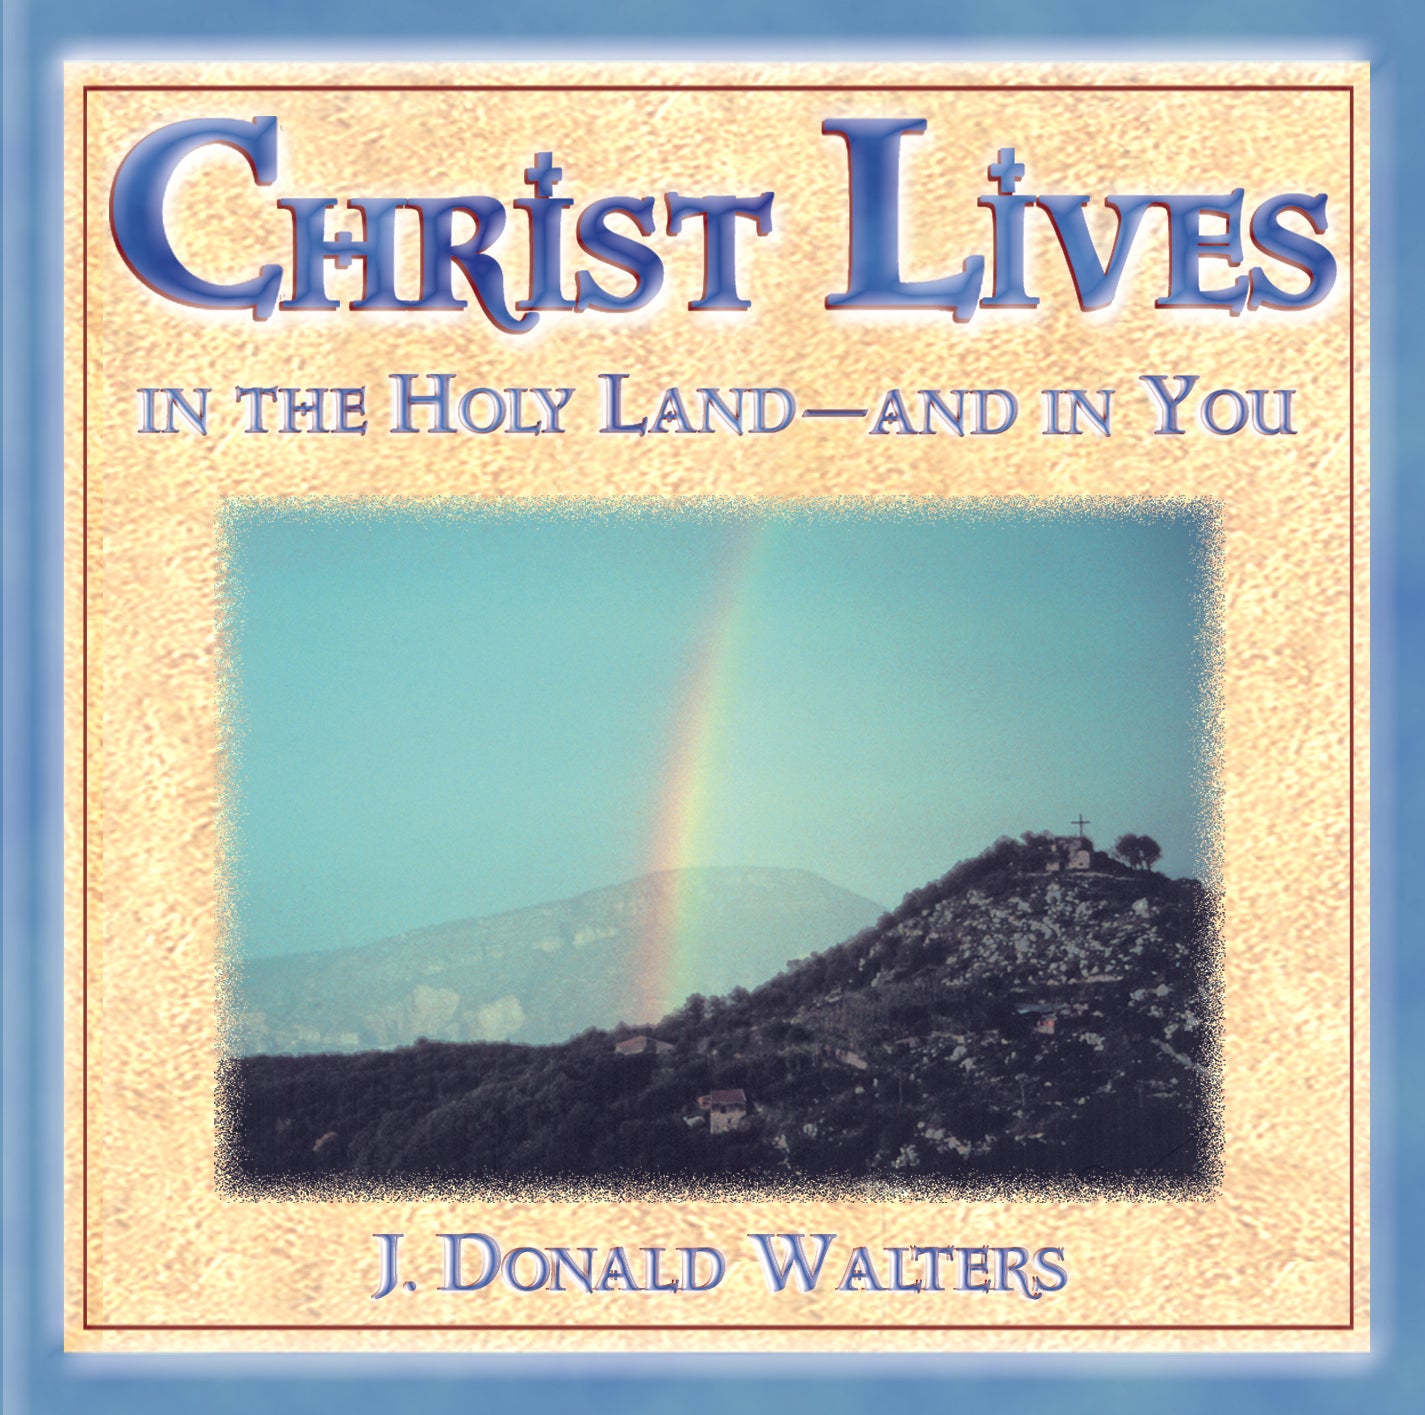 Christ Lives!: A Pilgrimage to the Holy Land (archival recording) - by Swami Kriyananda  - Digital